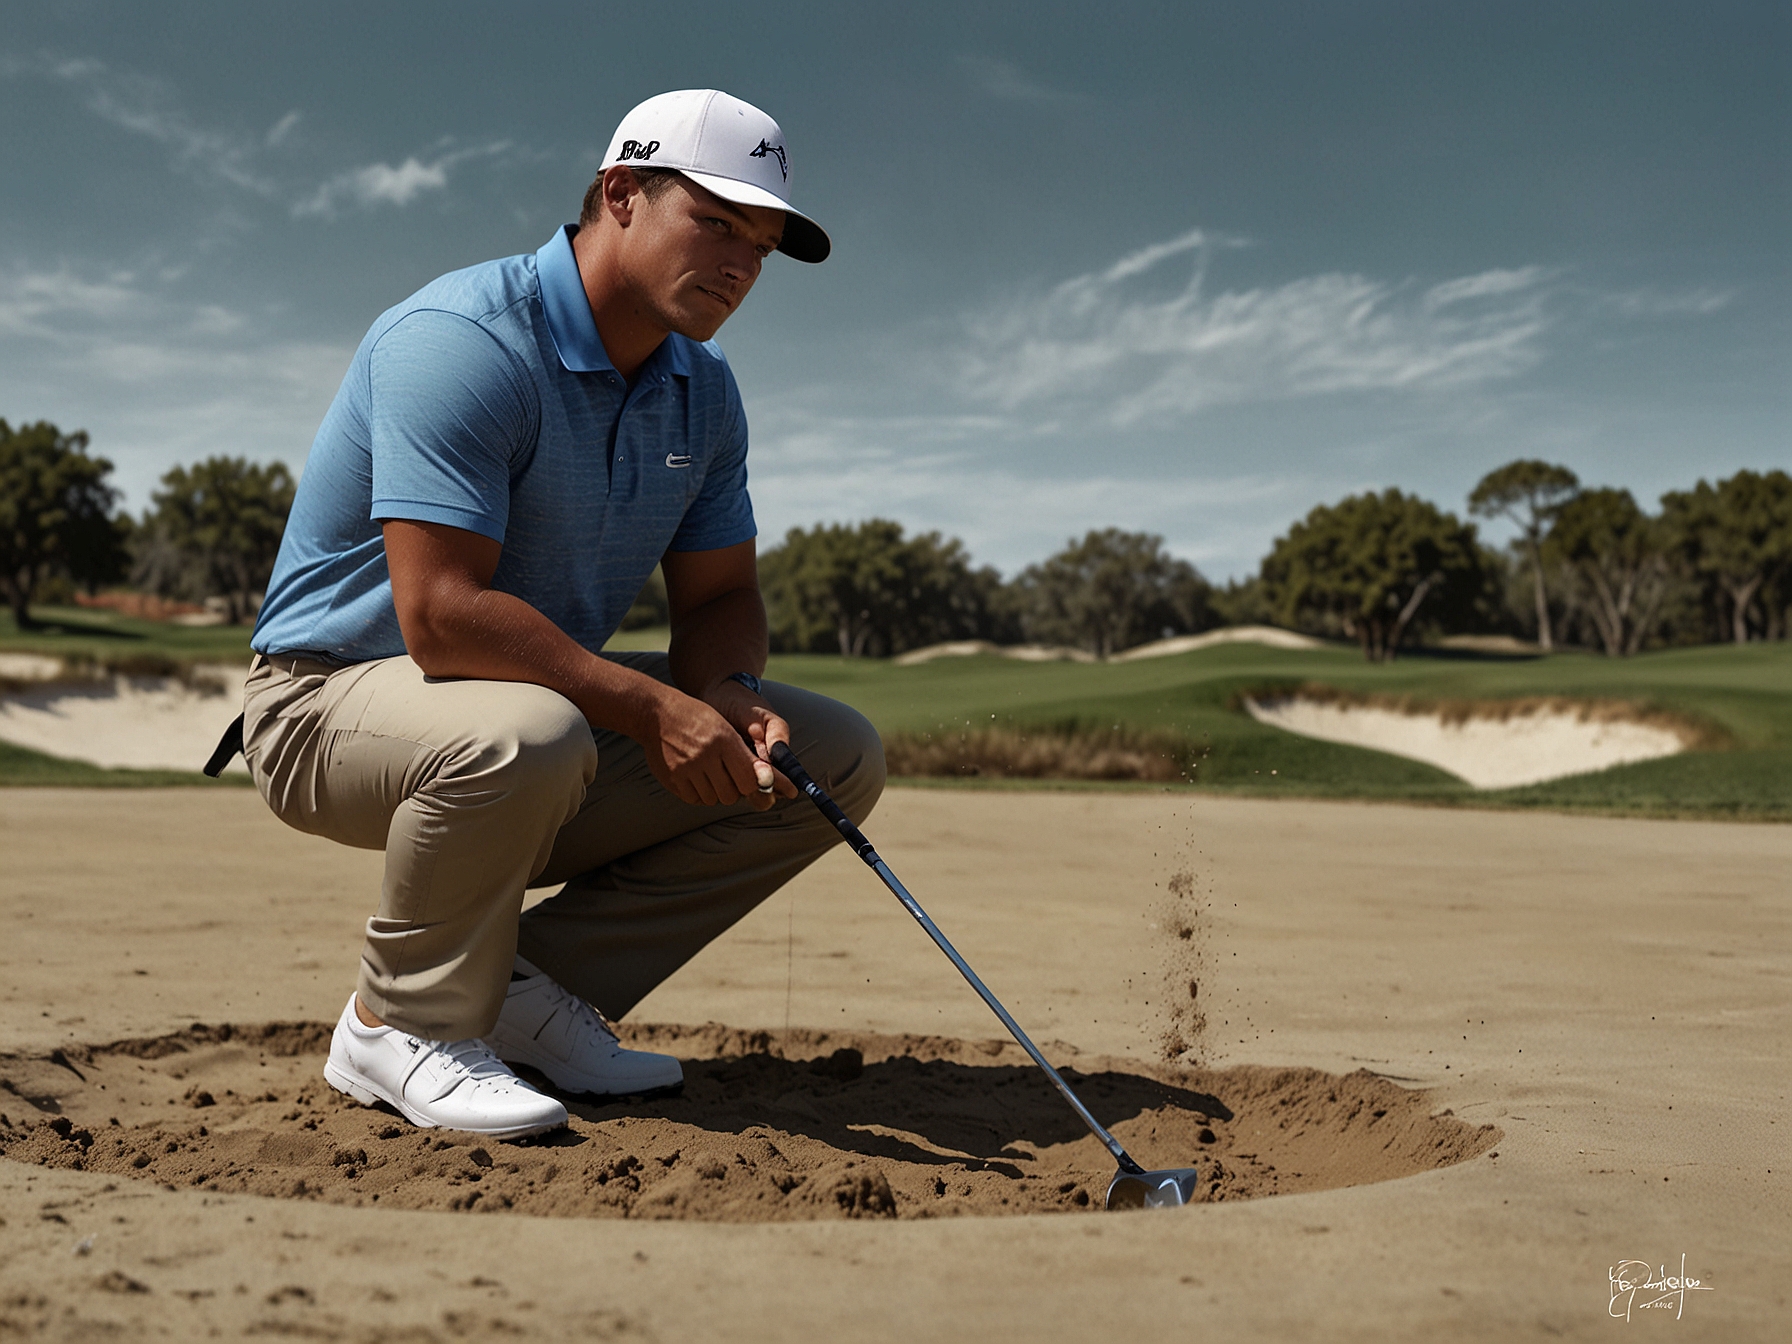 Bryson DeChambeau prepares to take a bunker shot, analyzing the sand and wind conditions, demonstrating his meticulous and scientific approach to golf.